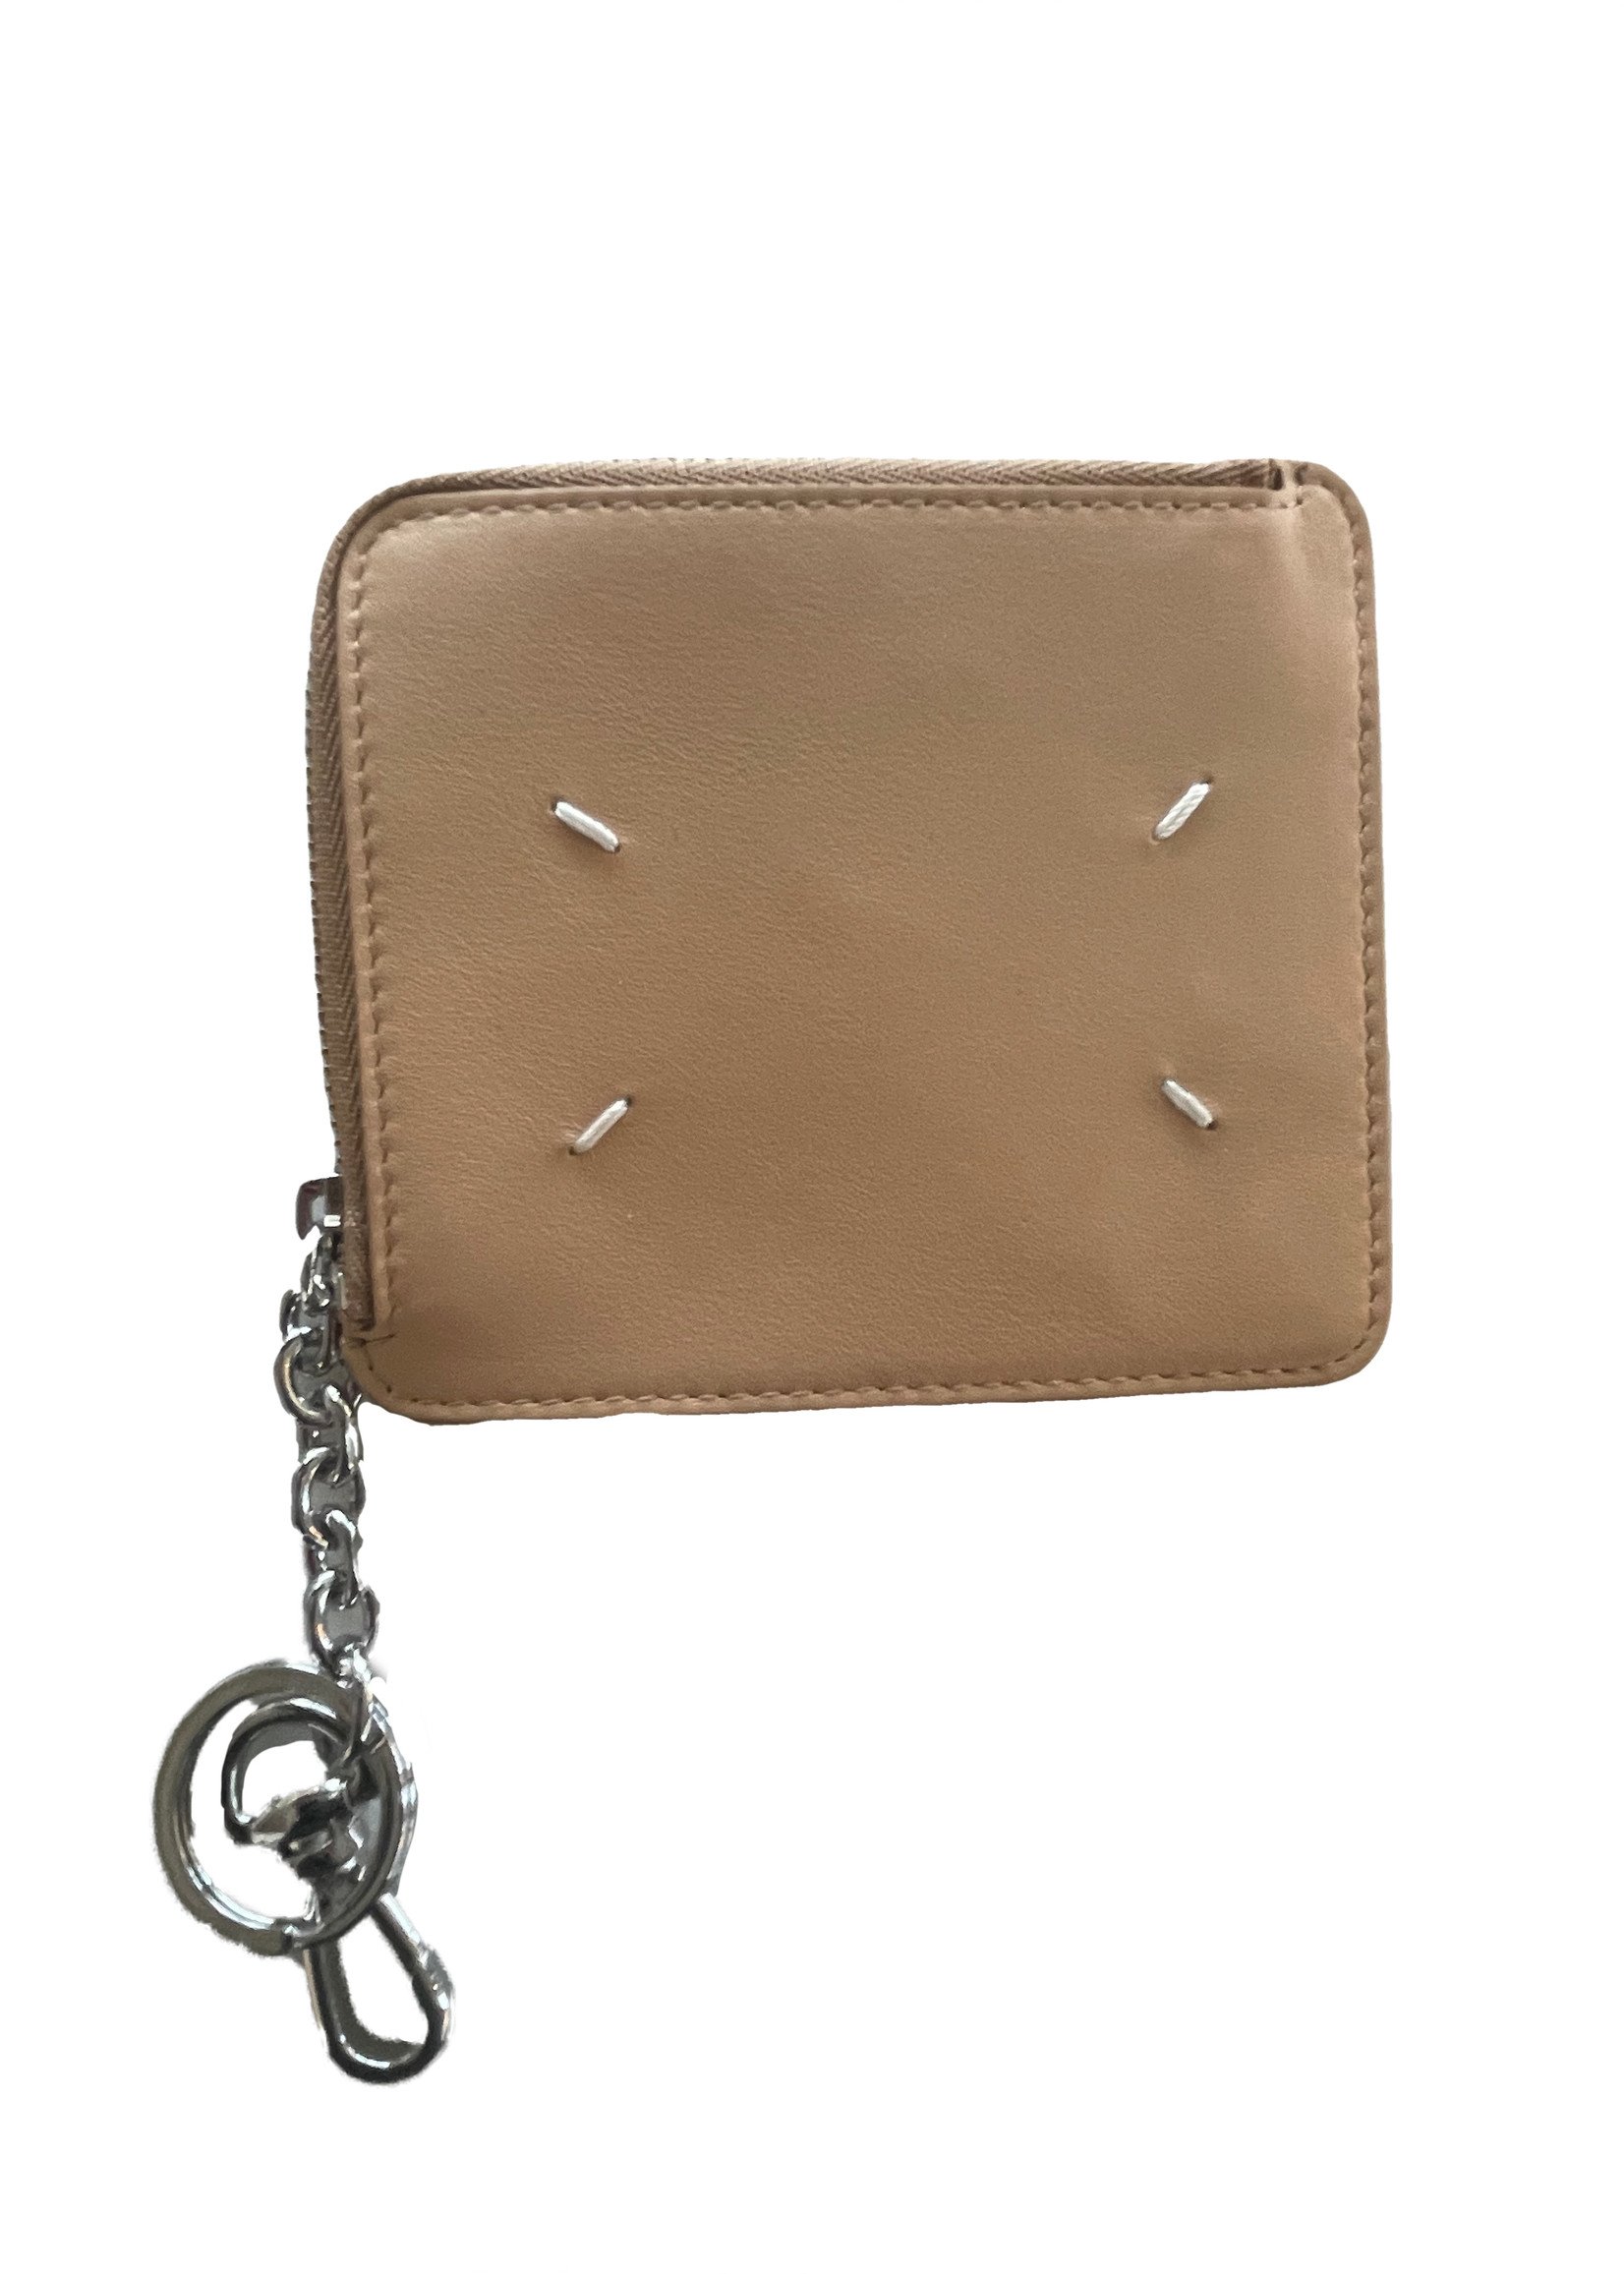 Maison Margiela ZIP WALLET WITH KEYCHAIN IN Nude AND Silver